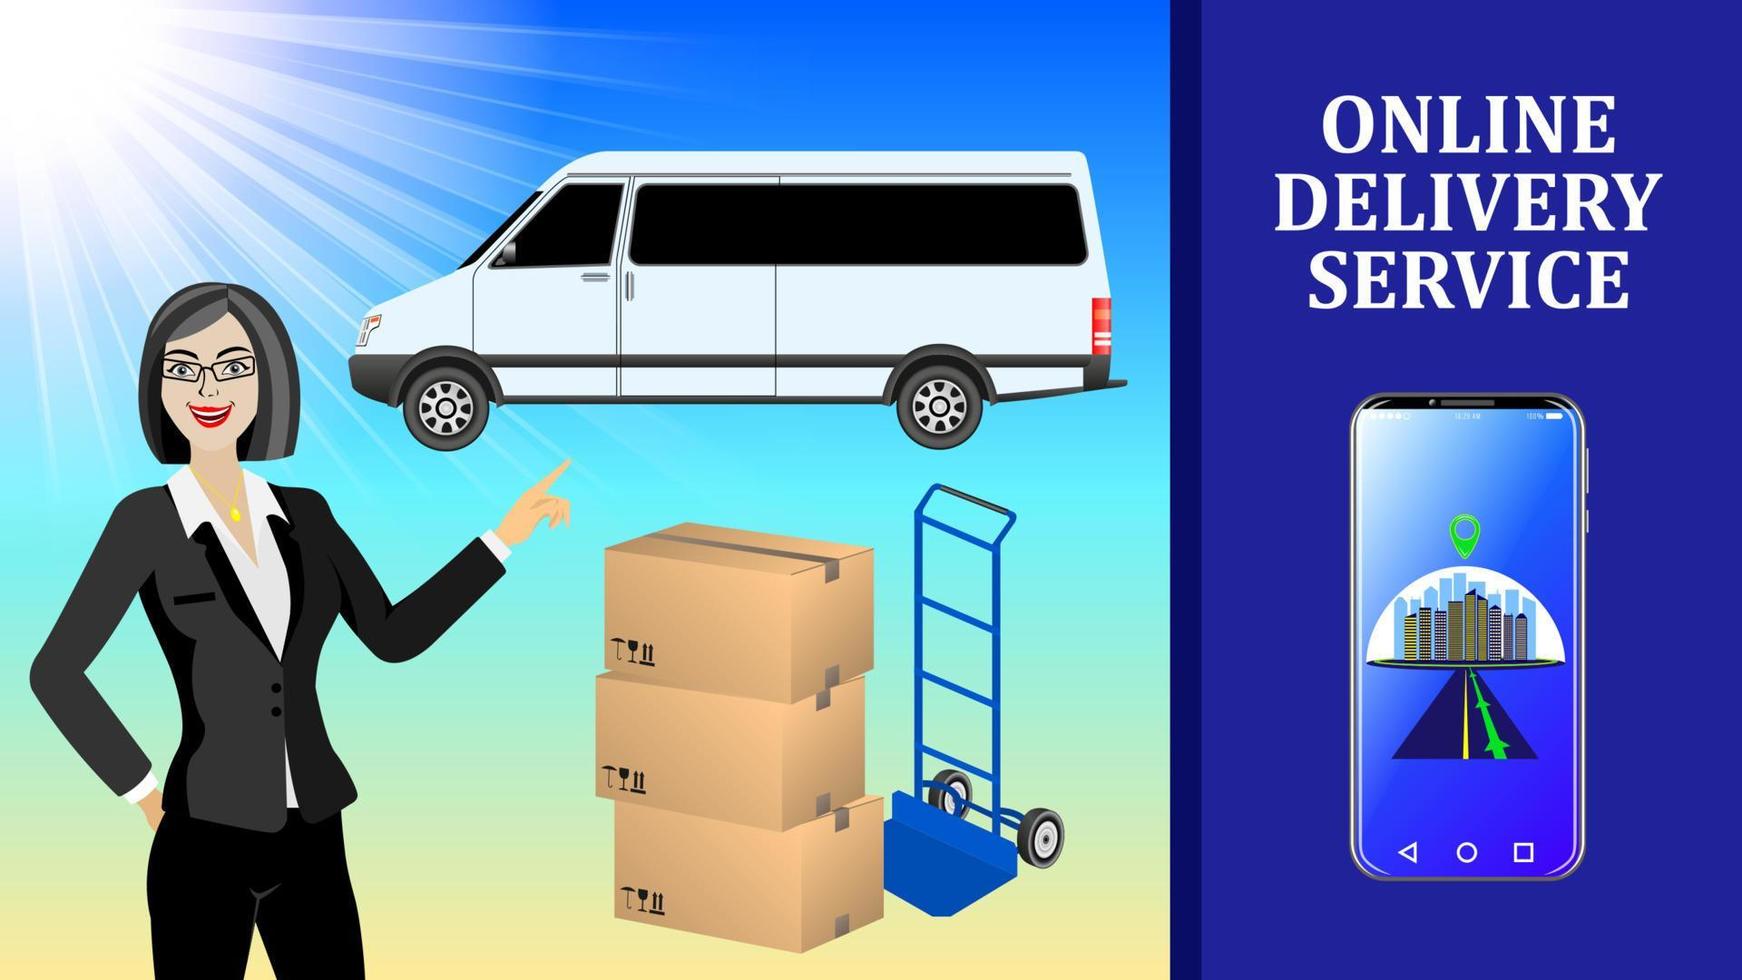 Online Delivery Service background vector